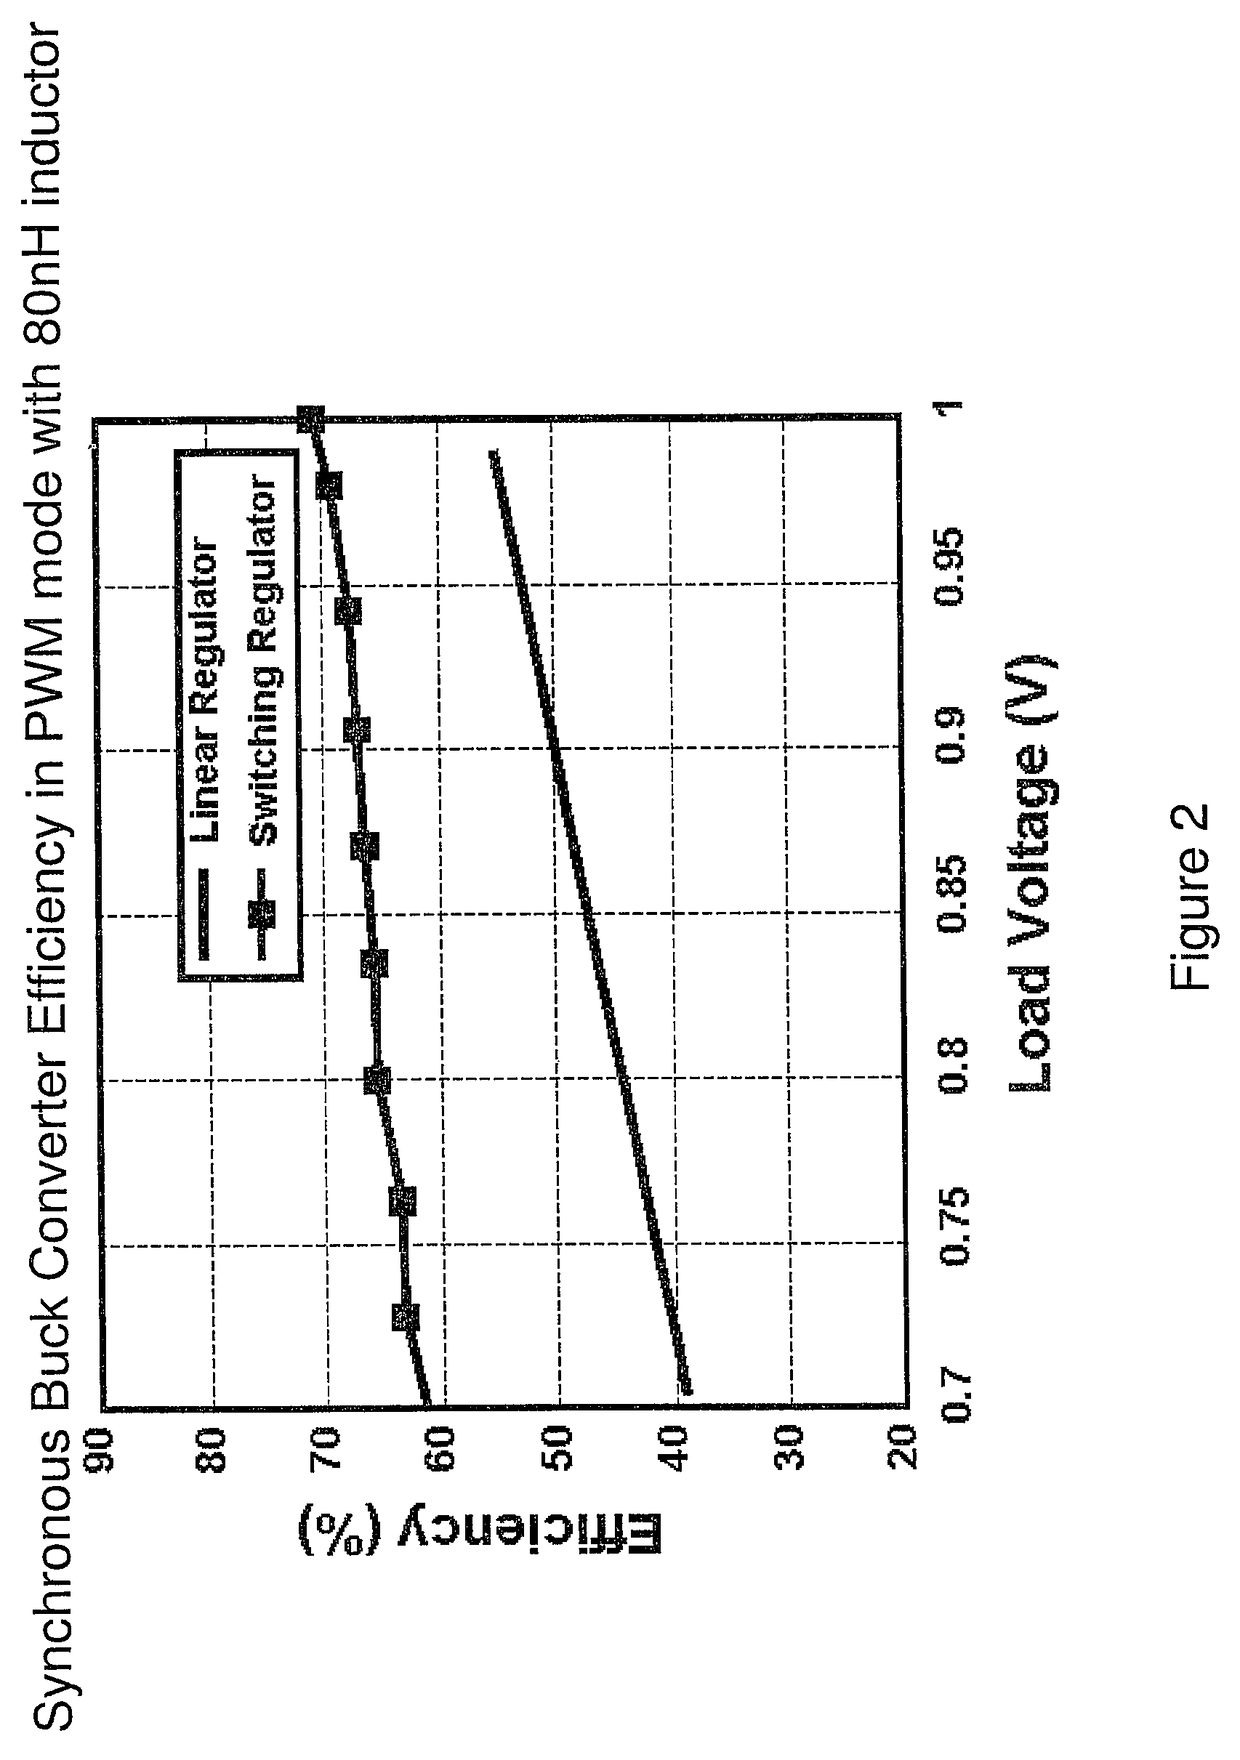 Circuit and method for a fully integrated switched-capacitor step-down power converter